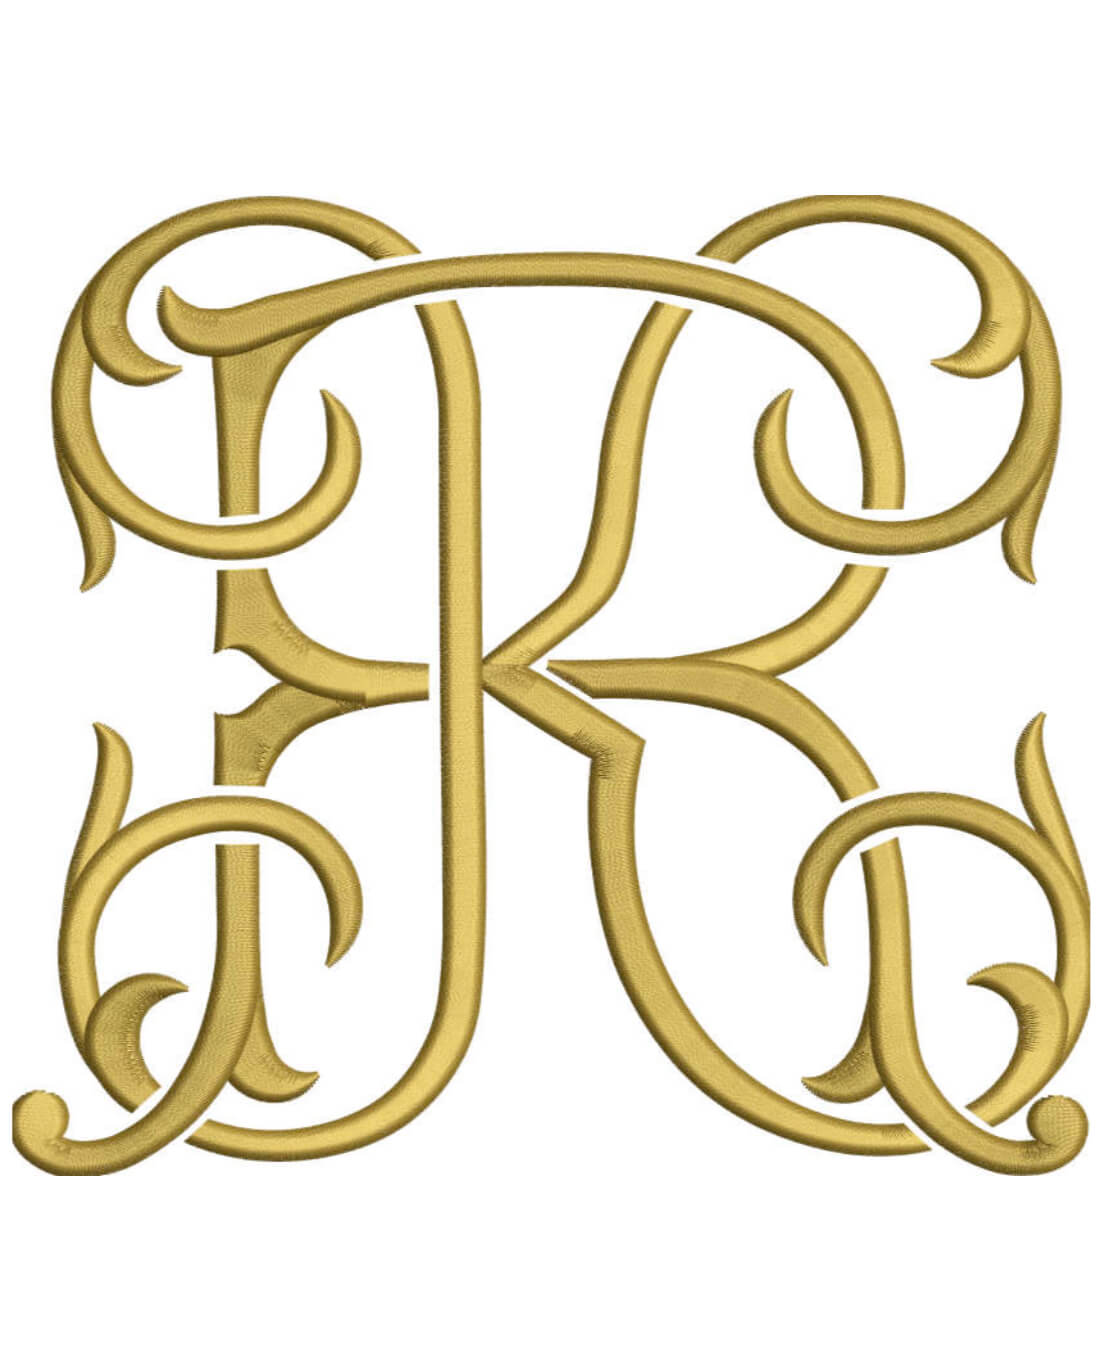 Monogram Couture KR for Embroidery